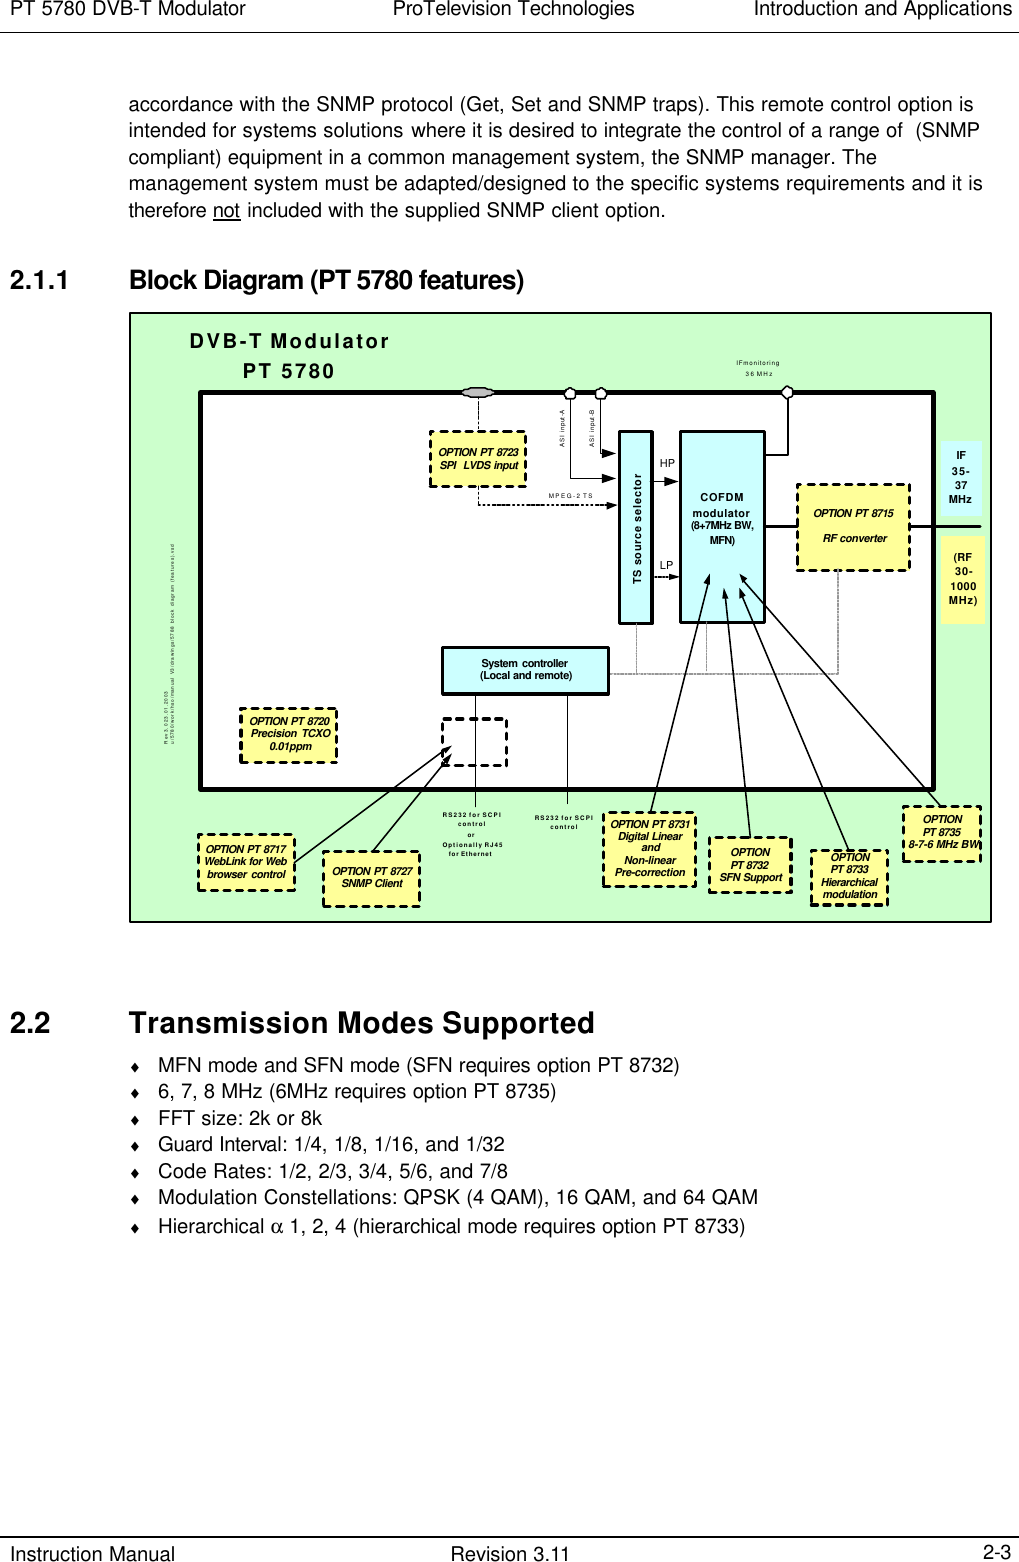 PT 5780 DVB-T Modulator  ProTelevision Technologies Introduction and Applications  Instruction Manual Revision 3.11    2-3 accordance with the SNMP protocol (Get, Set and SNMP traps). This remote control option is intended for systems solutions where it is desired to integrate the control of a range of  (SNMP compliant) equipment in a common management system, the SNMP manager. The management system must be adapted/designed to the specific systems requirements and it is therefore not included with the supplied SNMP client option.  2.1.1 Block Diagram (PT 5780 features) Rev 3.0 23.01.2003u/5780/work/hso/manual V3/drawings/5788 block diagram (features).vsdCOFDMmodulator(8+7MHz BW,MFN)OPTION PT 8715RF converter(RF30-1000MHz)ASI input-AIF monitoring36 MHzMPEG-2 TSDVB-T ModulatorPT 5780ASI input-BTS source selectorHPLPRS232 for SCPIcontrolorOptionally RJ45for EthernetRS232 for SCPIcontrolOPTION PT 8717WebLink for Webbrowser control OPTION PT 8727SNMP ClientOPTION PT 8731Digital LinearandNon-linearPre-correctionSystem controller(Local and remote)OPTIONPT 8732SFN SupportOPTIONPT 8733HierarchicalmodulationOPTIONPT 87358-7-6 MHz BWOPTION PT 8720Precision TCXO0.01ppmIF35-37MHzOPTION PT 8723SPI  LVDS input   2.2 Transmission Modes Supported ♦ MFN mode and SFN mode (SFN requires option PT 8732) ♦ 6, 7, 8 MHz (6MHz requires option PT 8735) ♦ FFT size: 2k or 8k ♦ Guard Interval: 1/4, 1/8, 1/16, and 1/32 ♦ Code Rates: 1/2, 2/3, 3/4, 5/6, and 7/8 ♦ Modulation Constellations: QPSK (4 QAM), 16 QAM, and 64 QAM ♦ Hierarchical α 1, 2, 4 (hierarchical mode requires option PT 8733)   